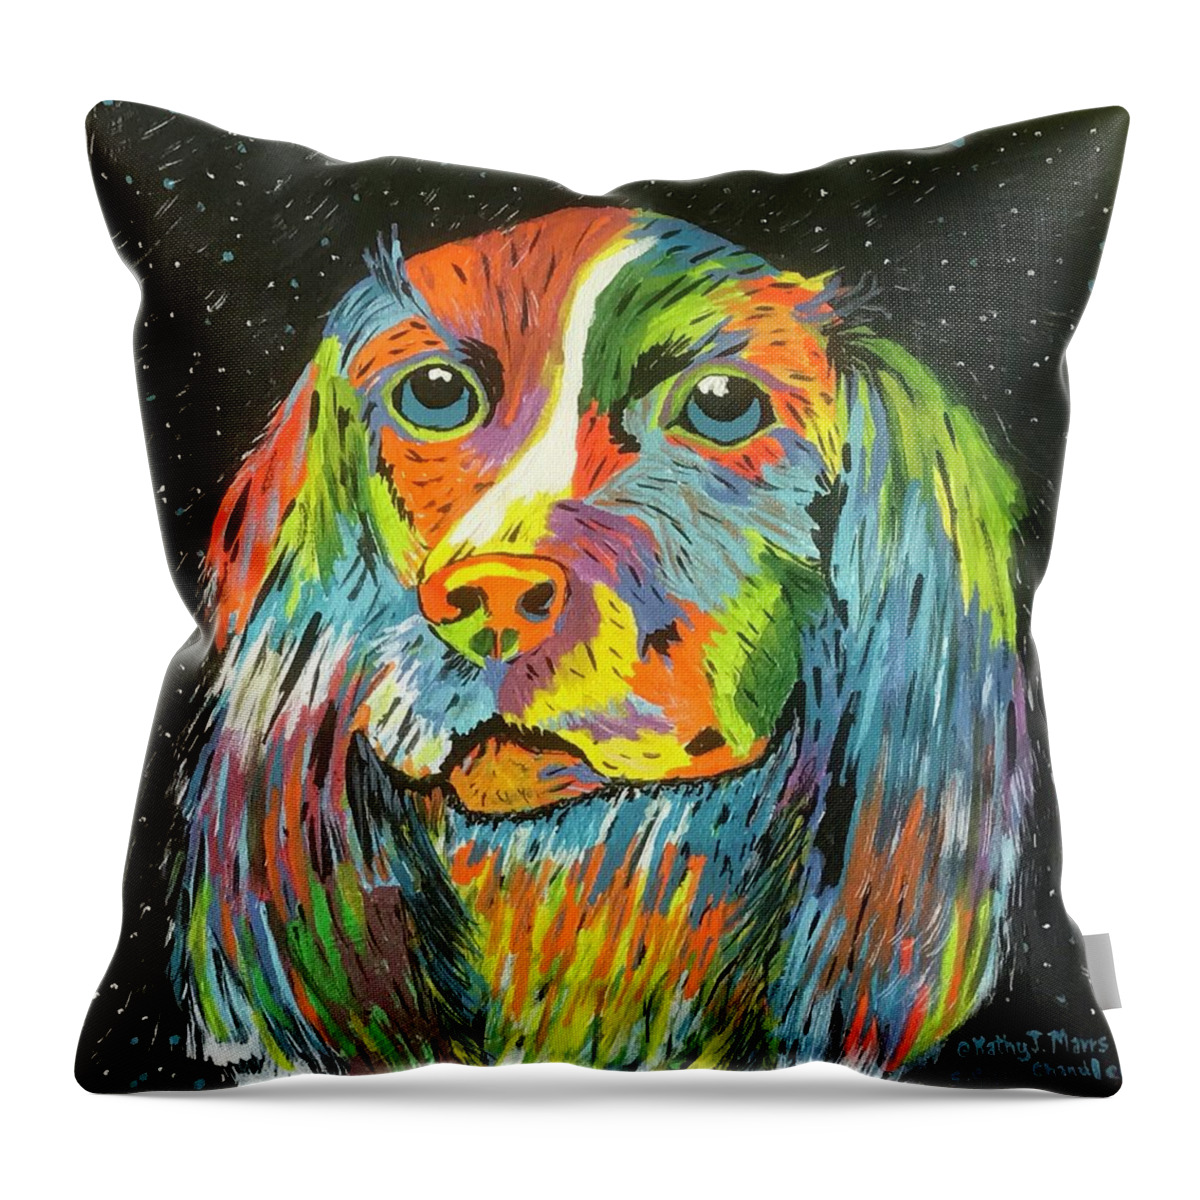 Vibrant Dog Throw Pillow featuring the painting Vibrant Dog by Kathy Marrs Chandler